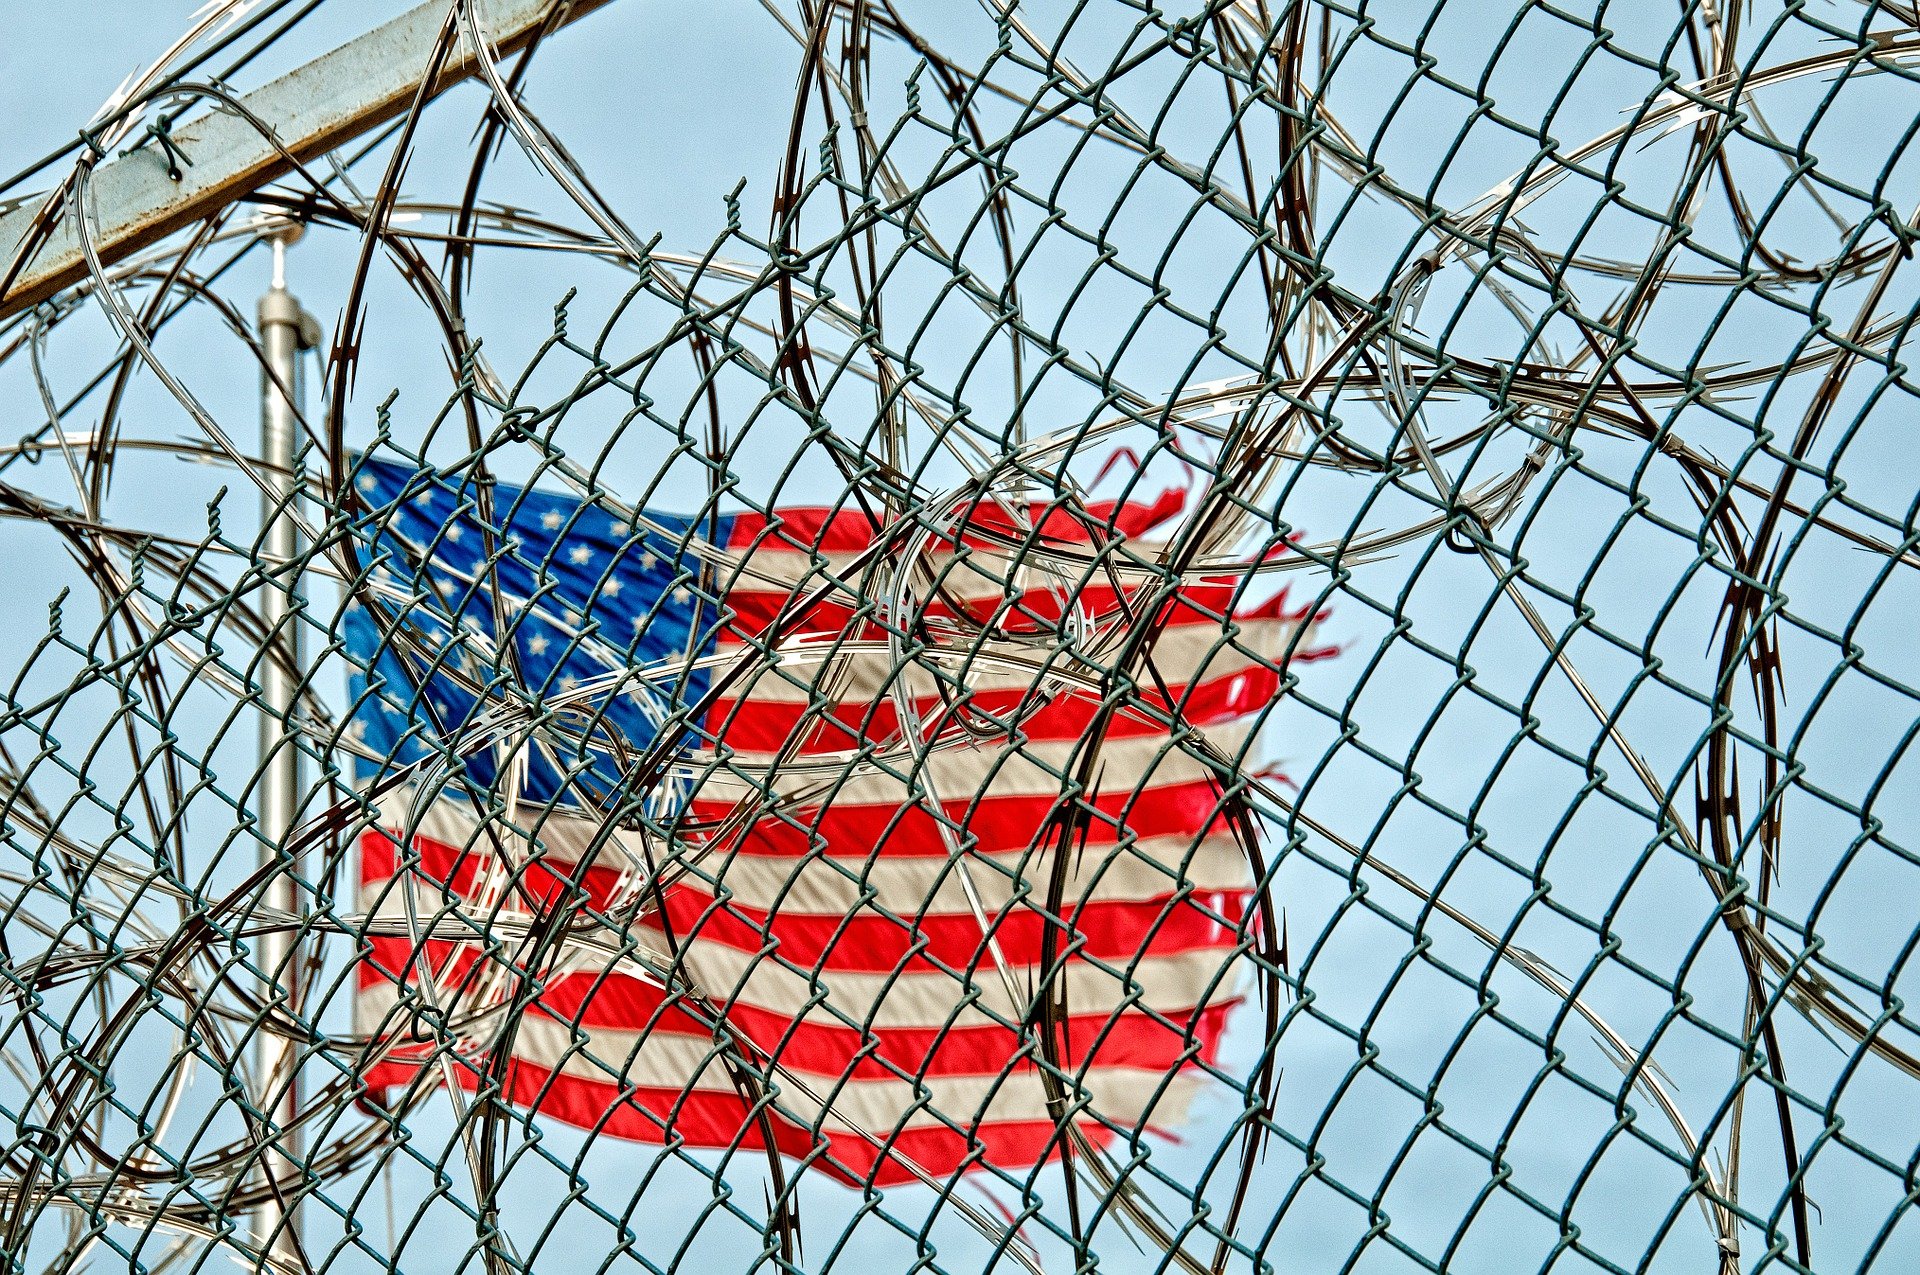 Pictured - Prison detention wire fence and the American flag | Source: Pixabay 